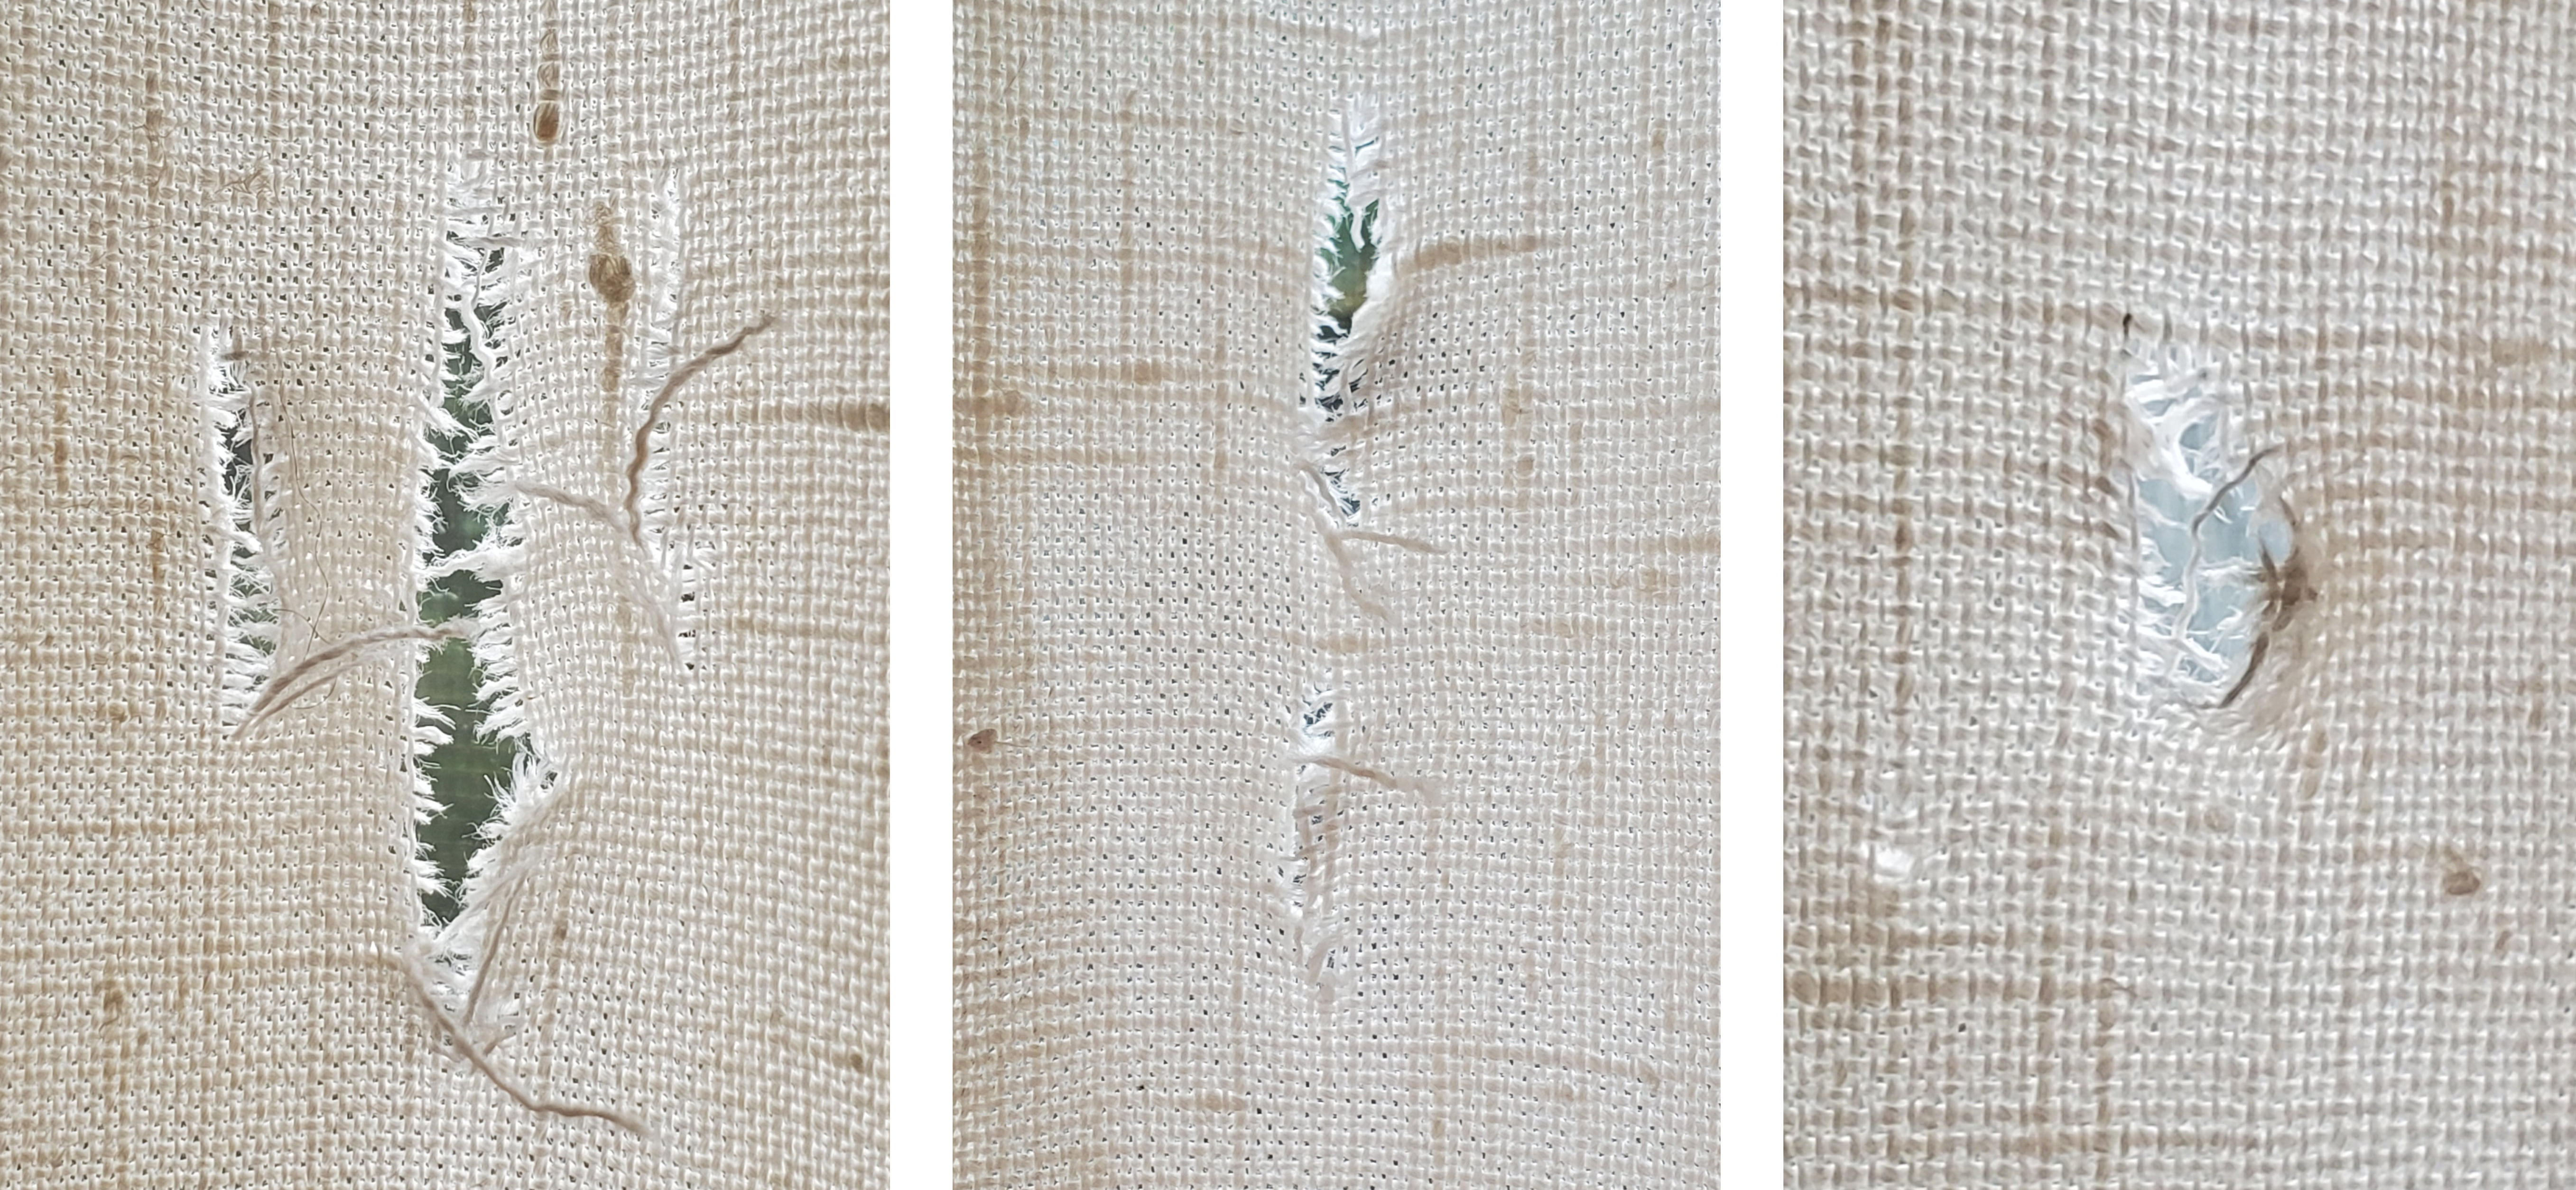 Close-ups of the holes in the curtains